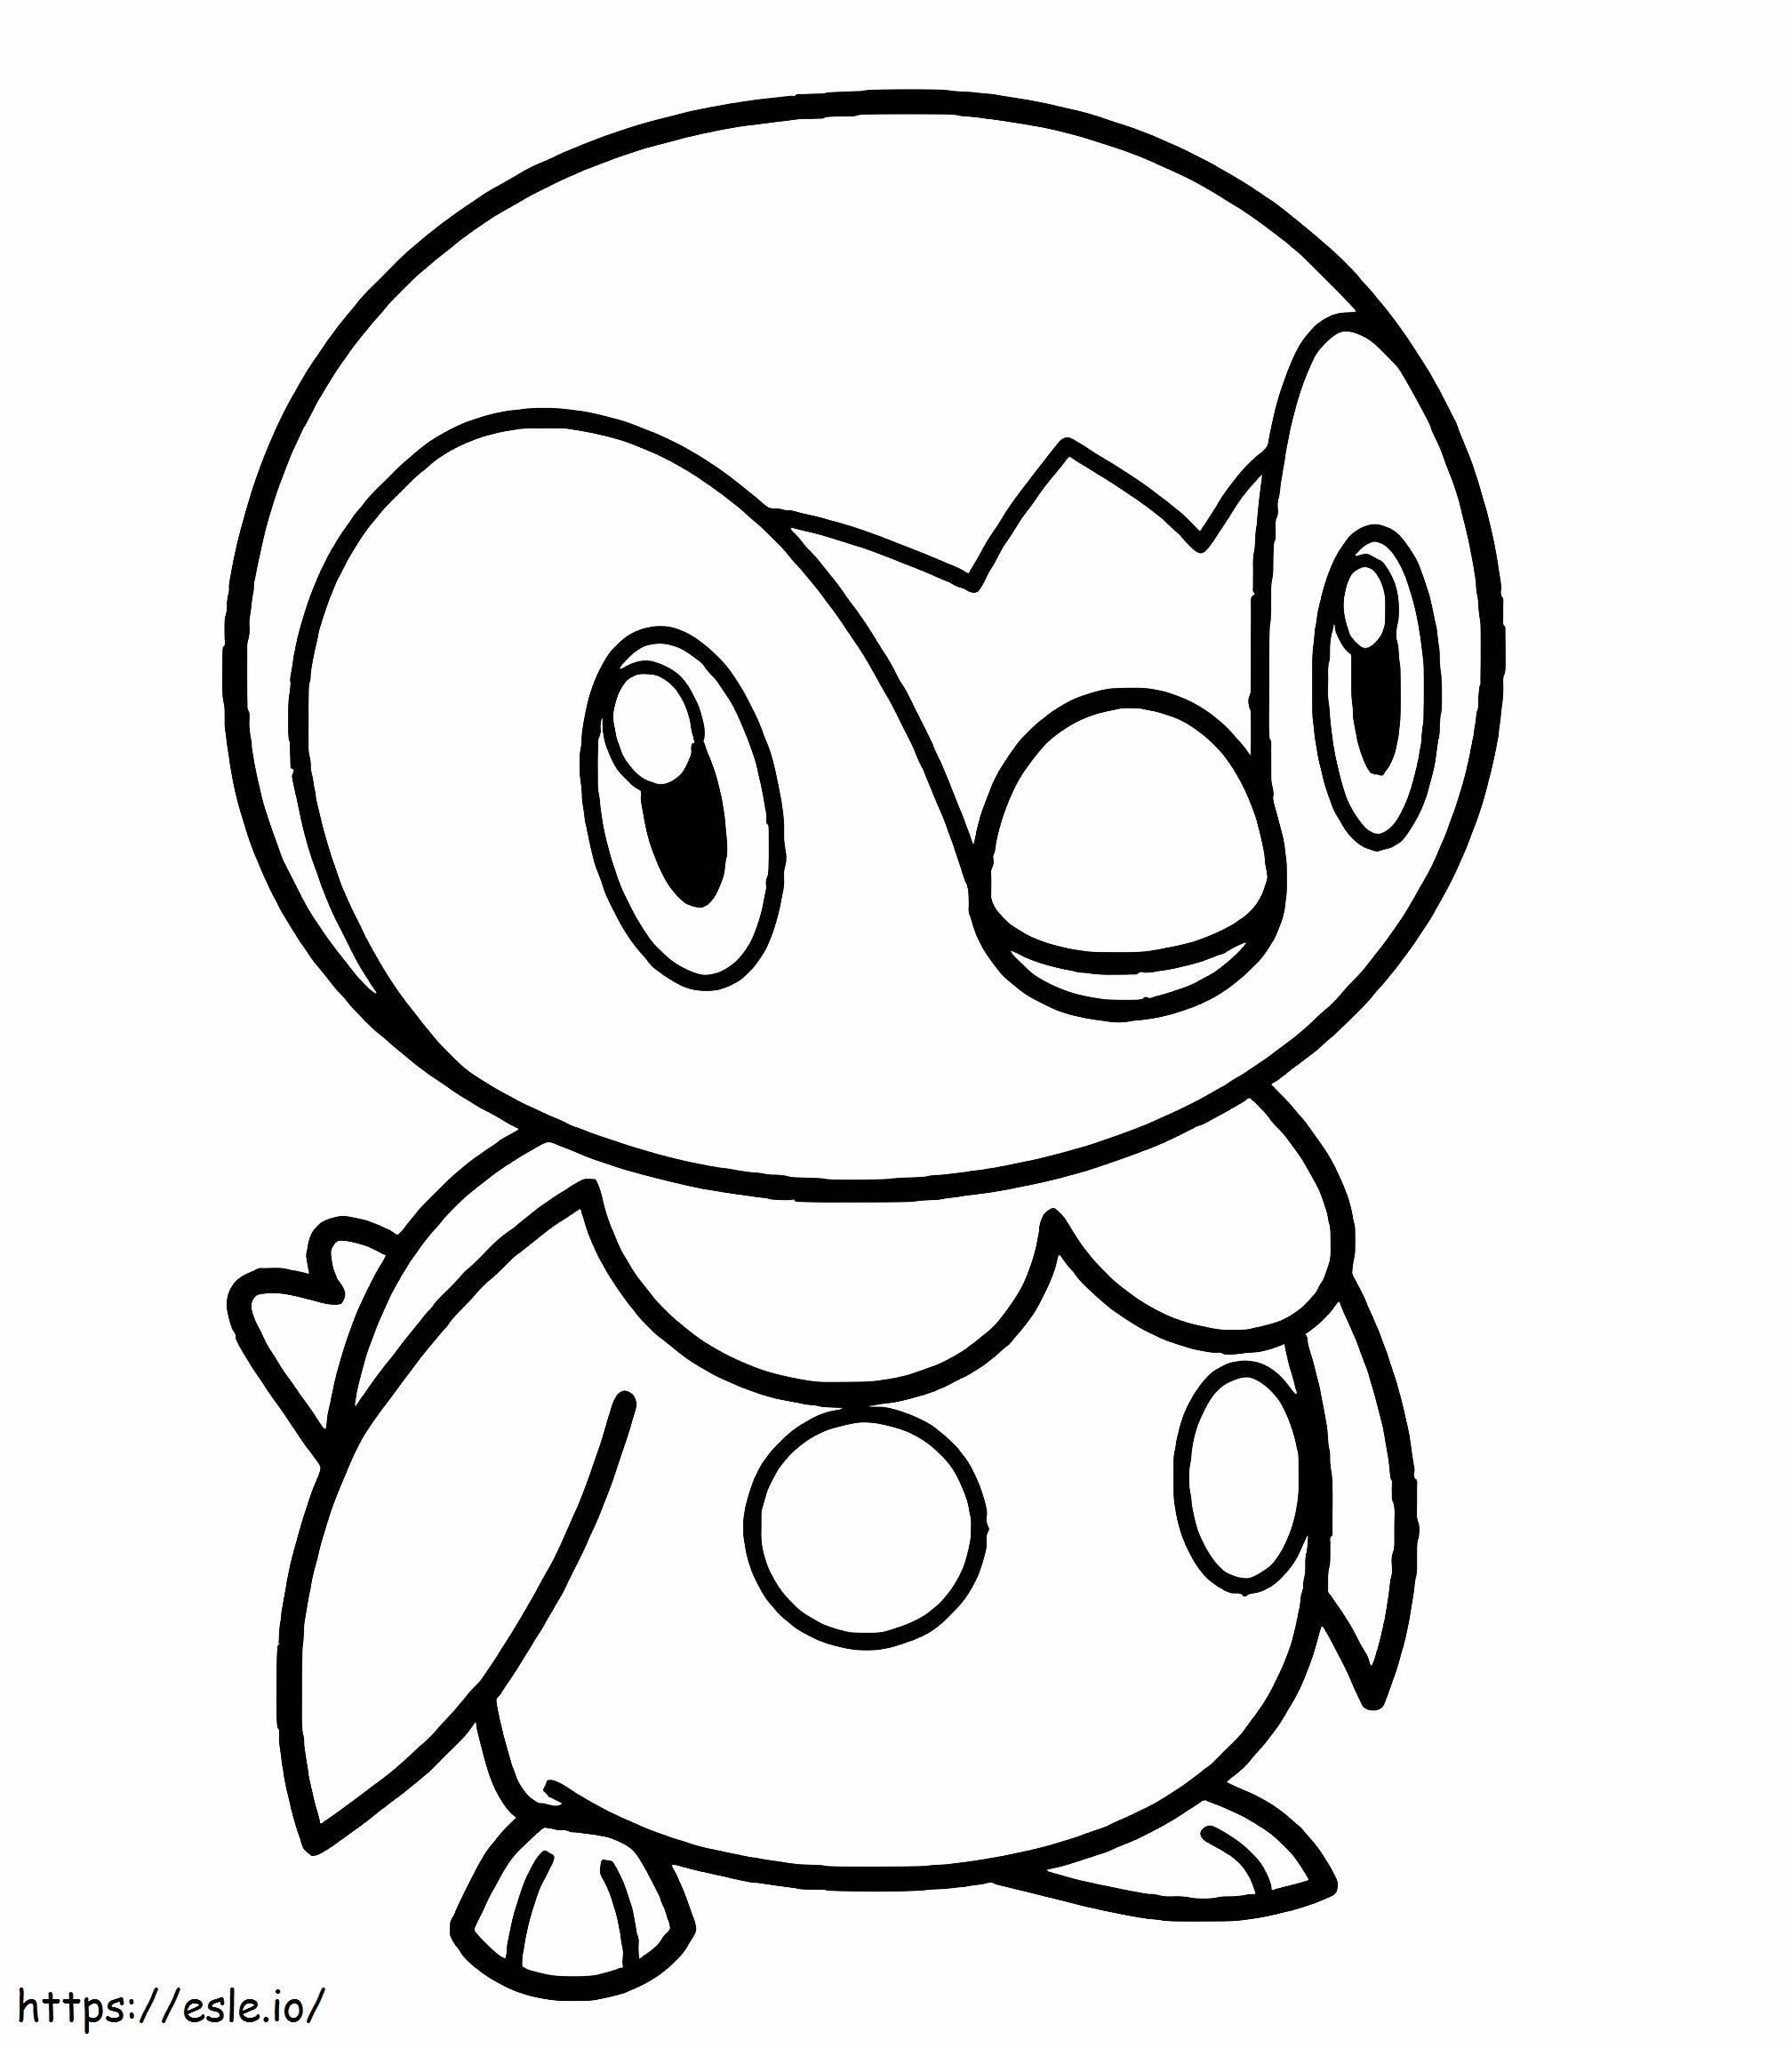 Cute Piplup Pokemon coloring page